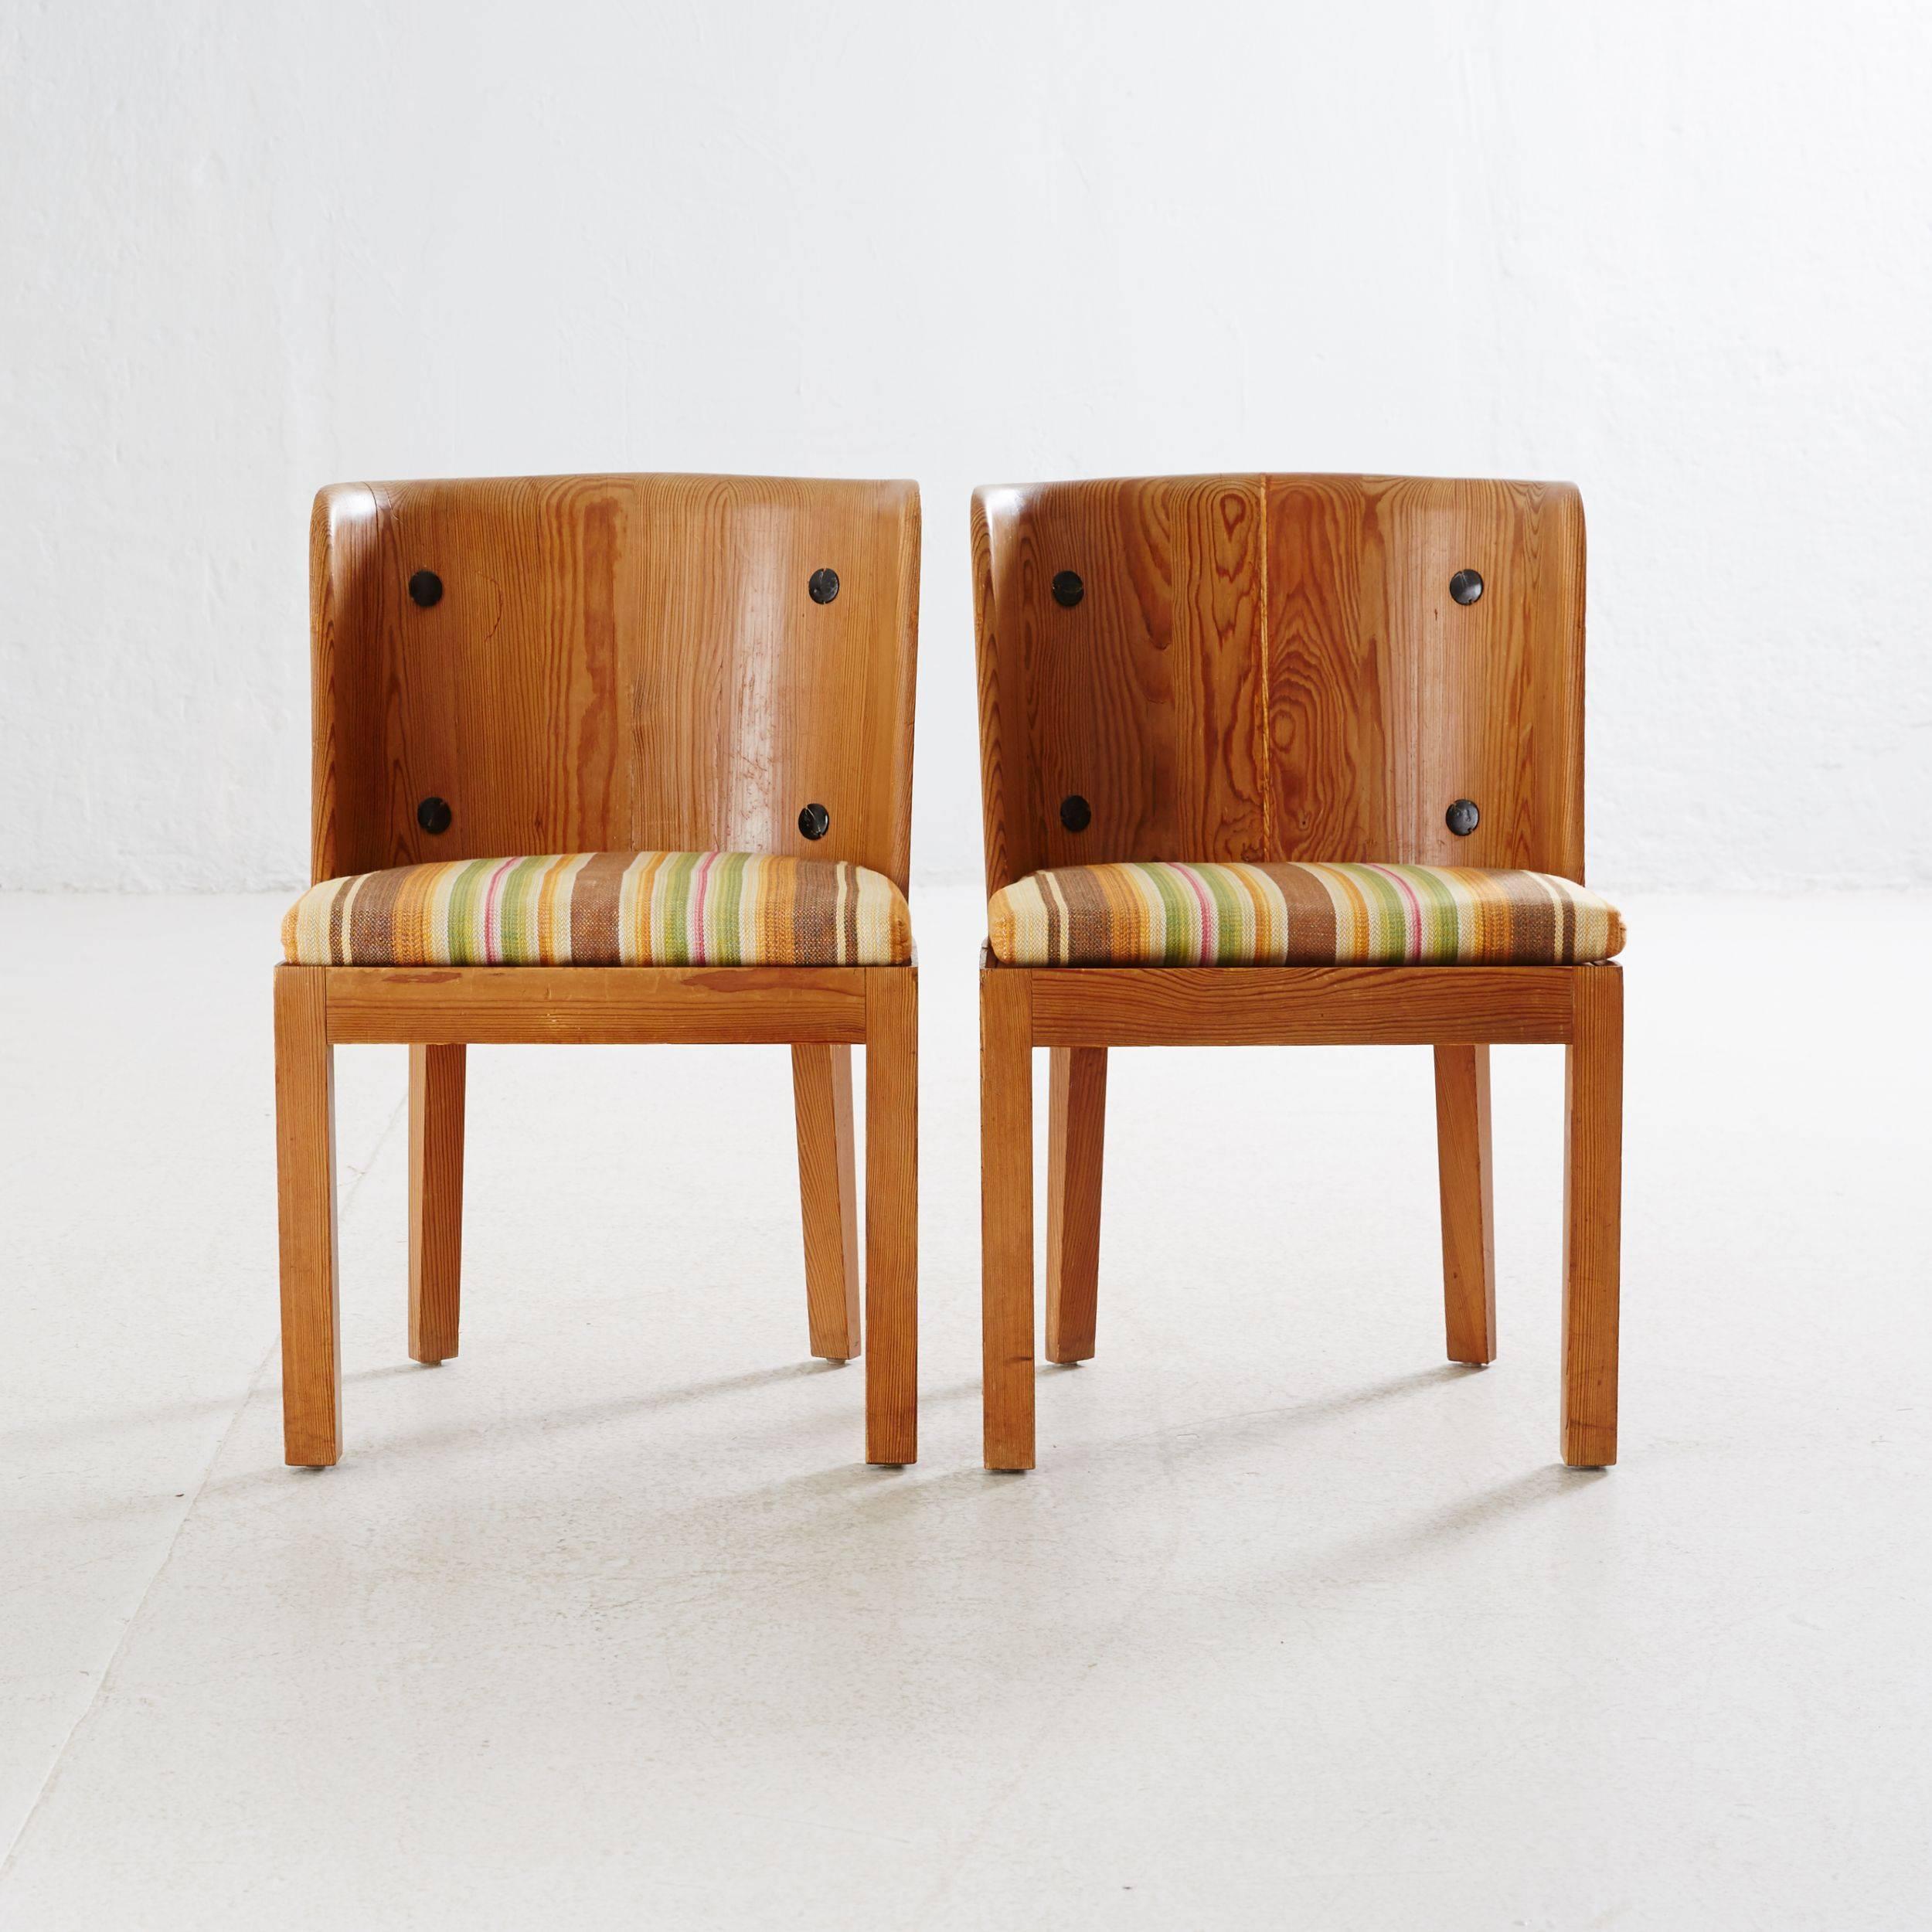 Axel Einar Hjorth.
A pair of Lovö armchairs, designed by Axel Einar Hjorth in 1932.
Manufactured by Nordiska Kompaniet in 1932.
Stained pinewood.
Original upholstery.
Iron rivets.